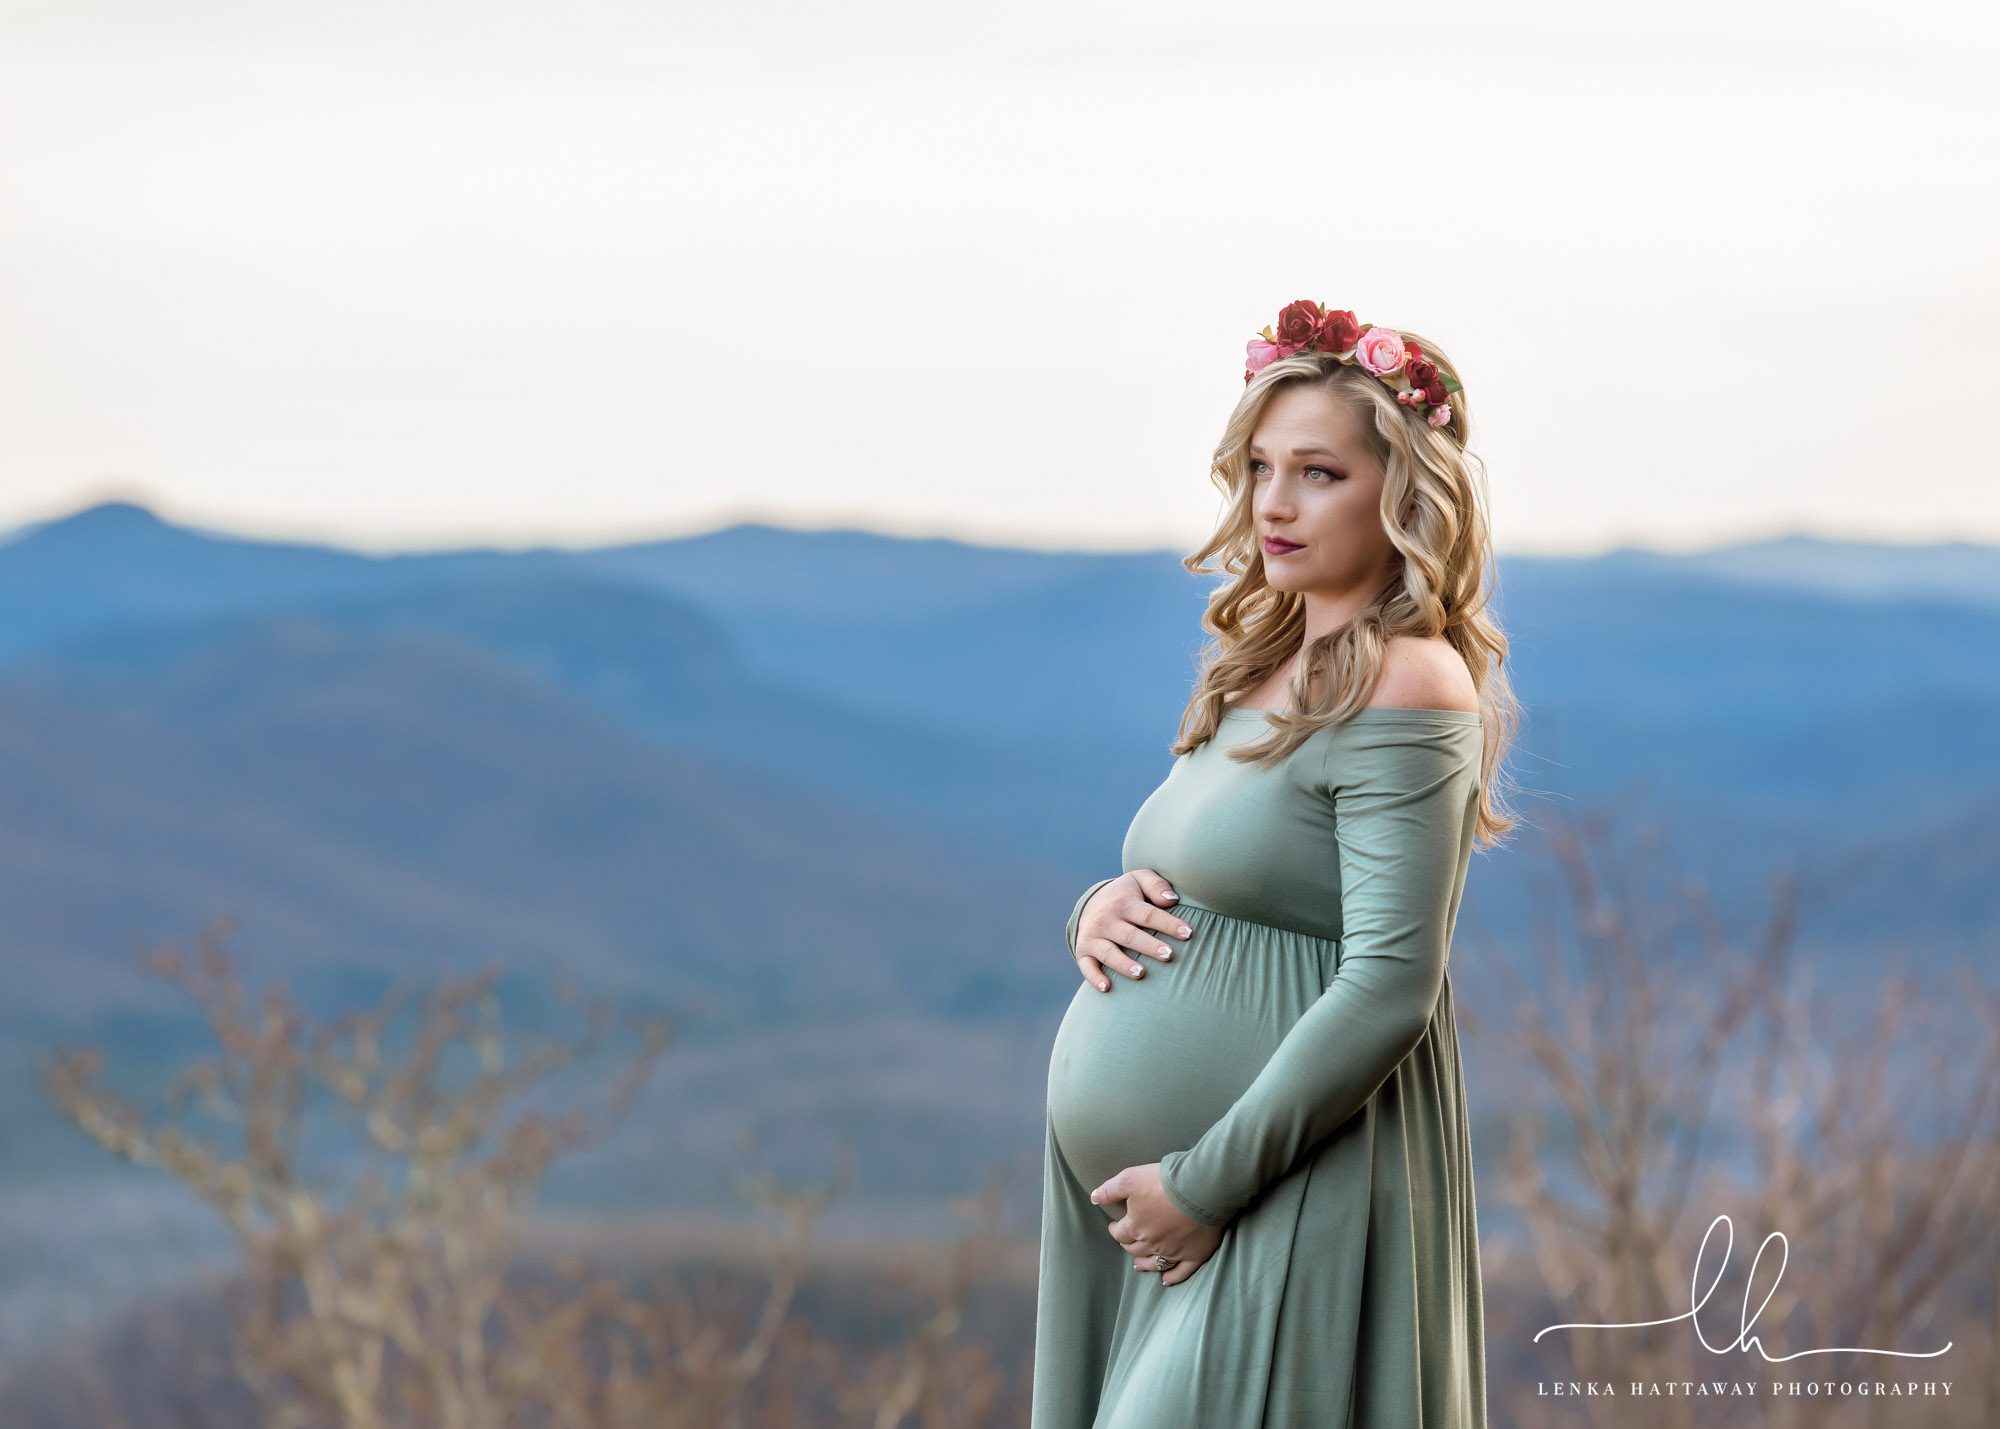 Maternity photo taken in the mountains.